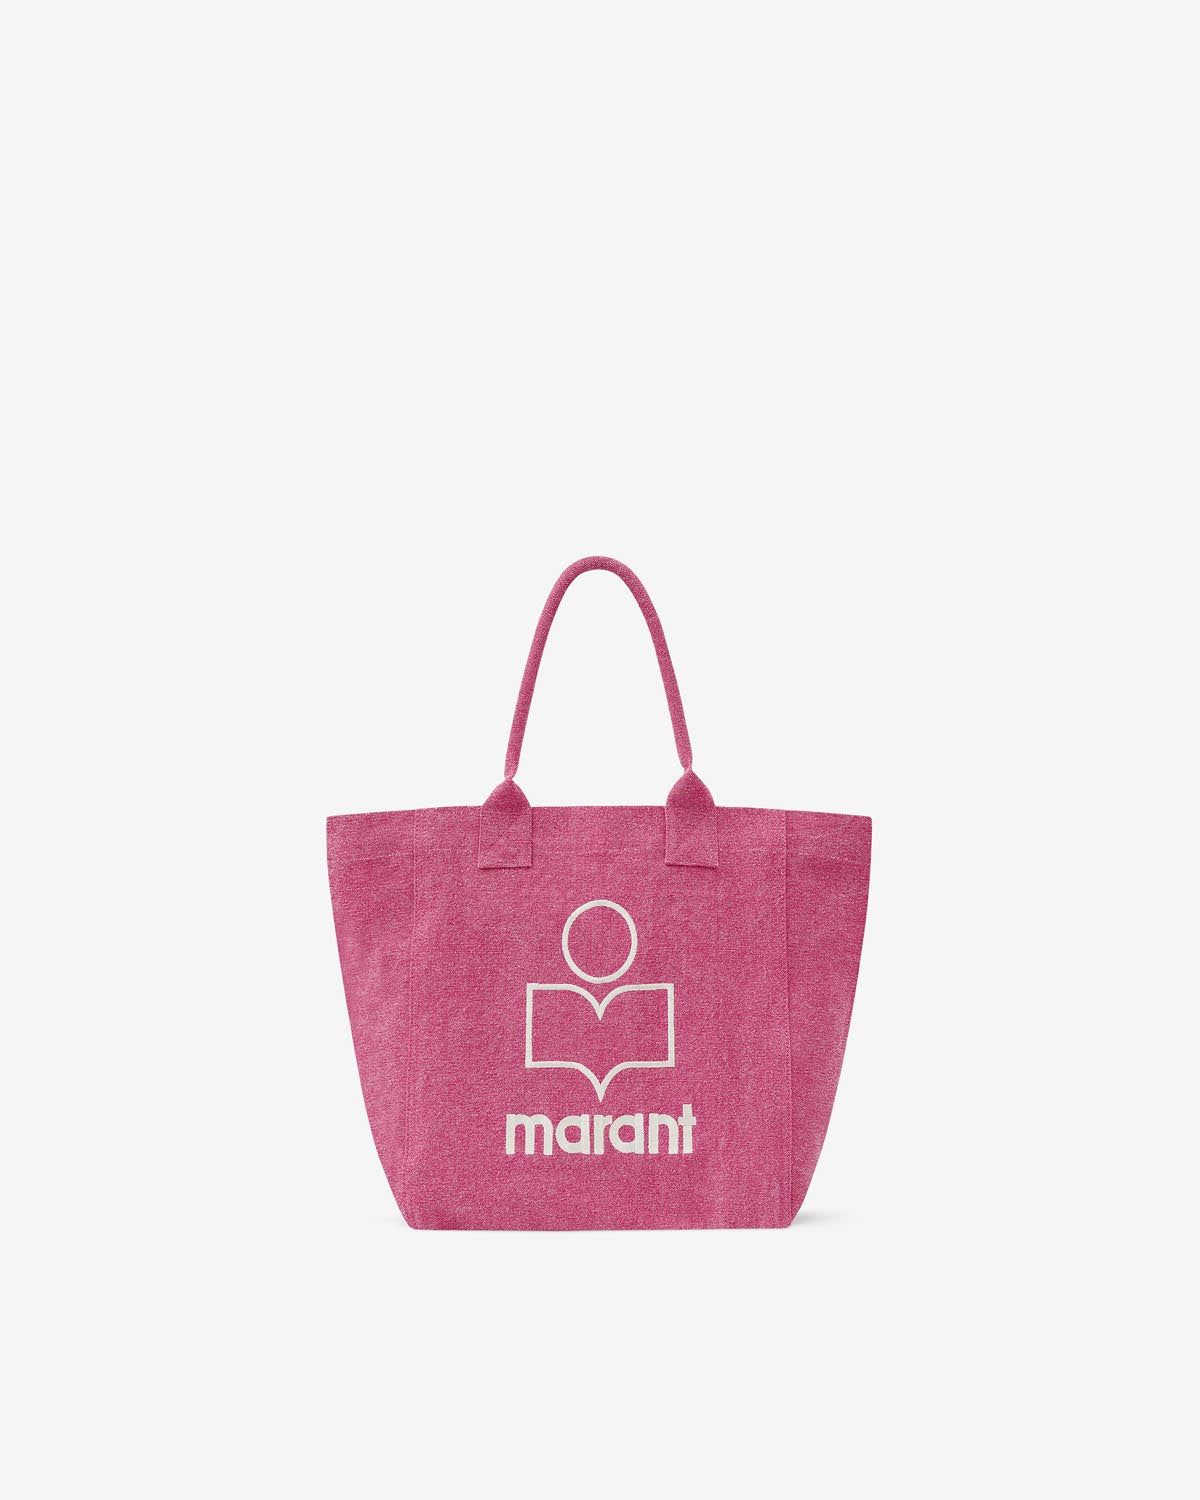 Tote bag yenky small Woman Rosa 6